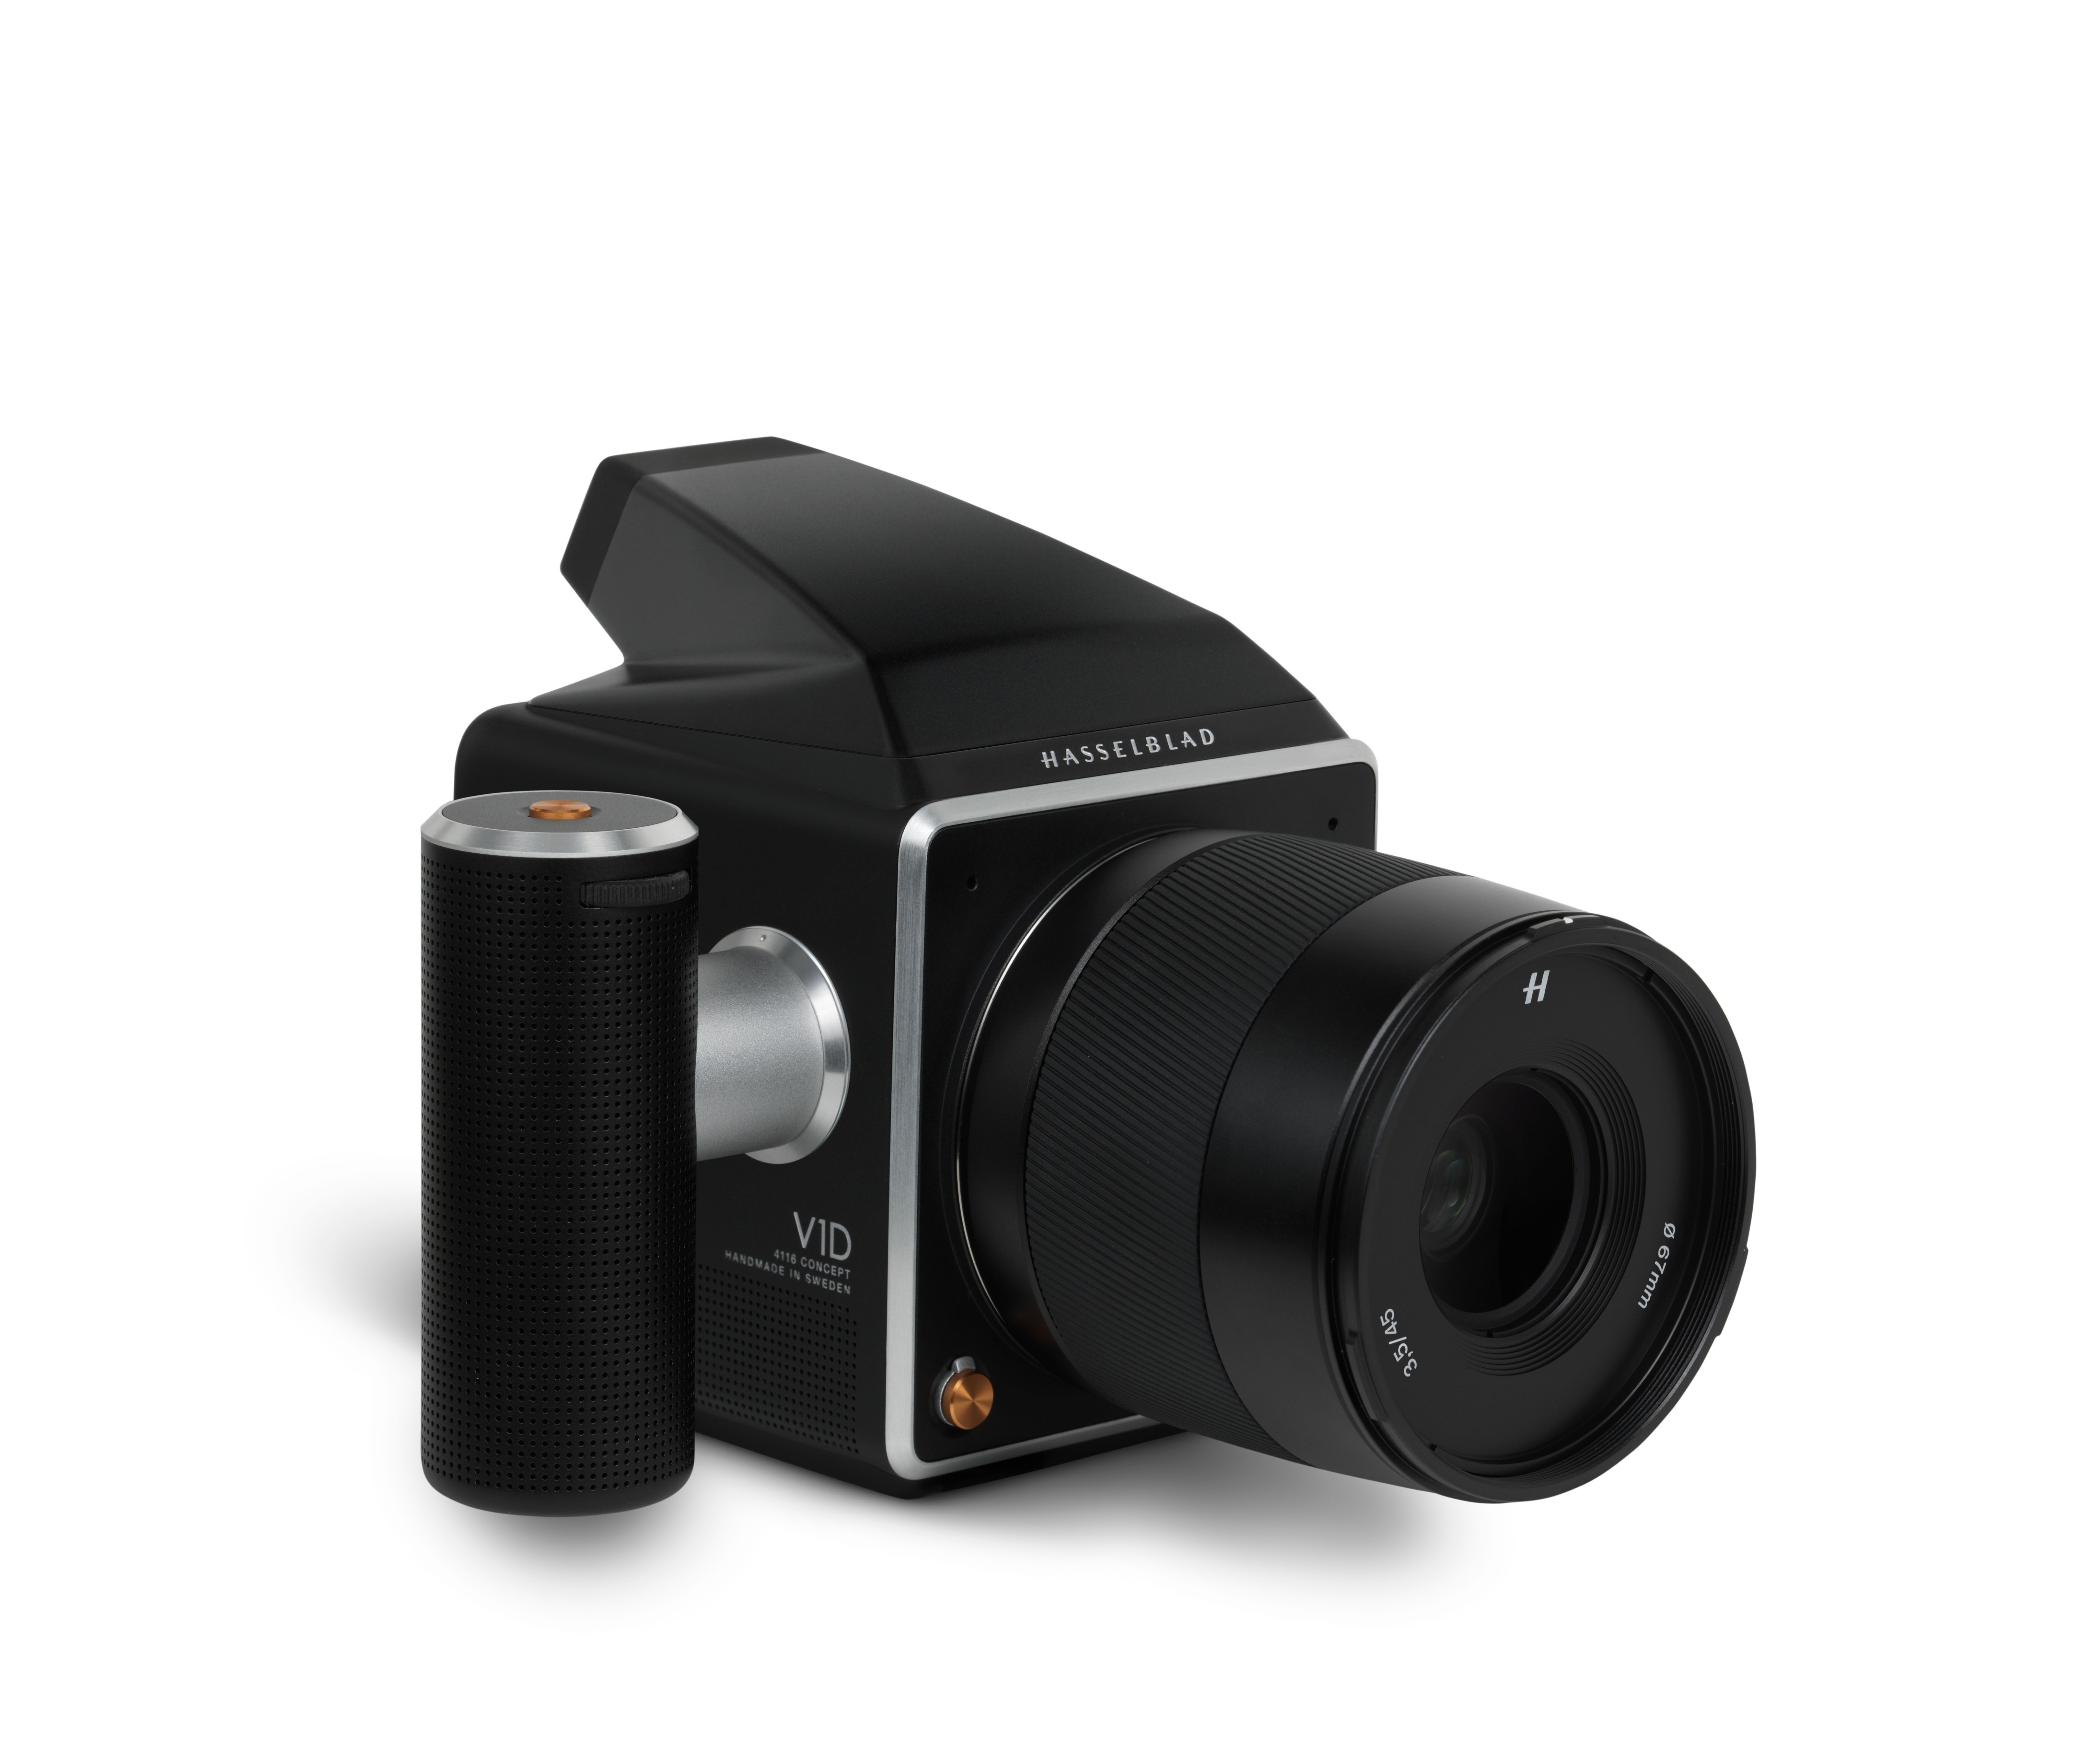 Hasselblad's special edition all-black X1D looks sick - The Verge